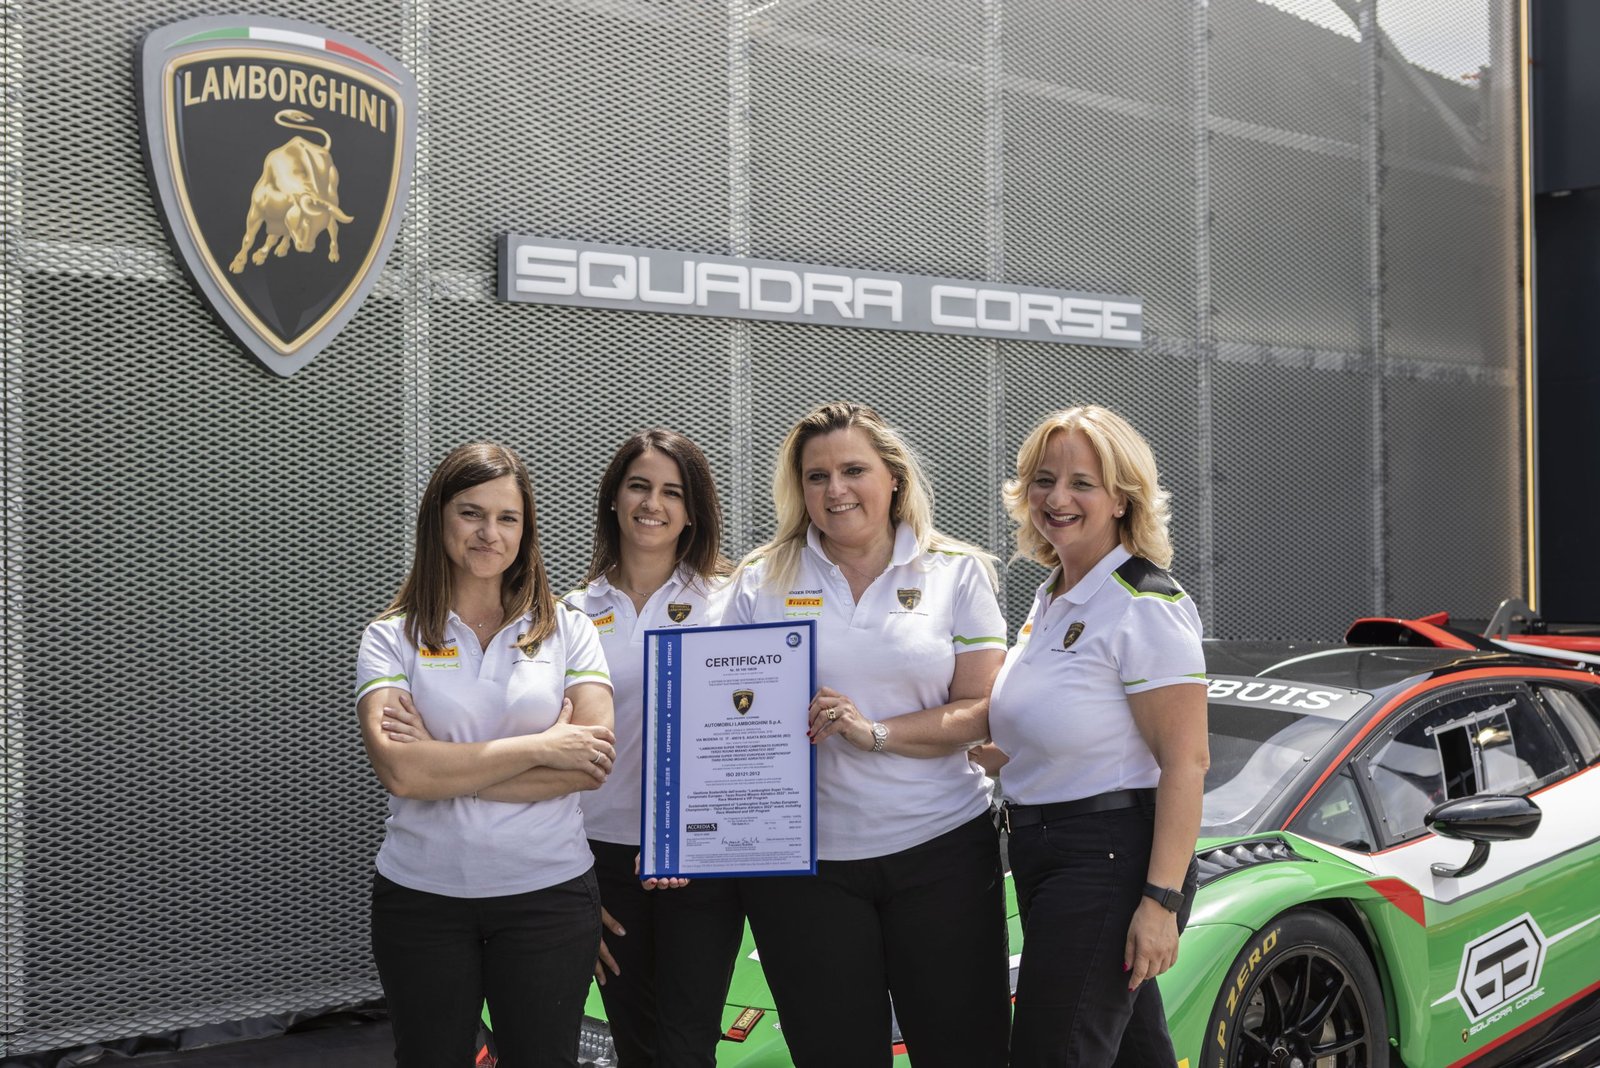 Automobili Lamborghini certified UNI/PdR 125:2022 for gender equality policies © Copyright PLPG GLOBAL MEDIA 2023